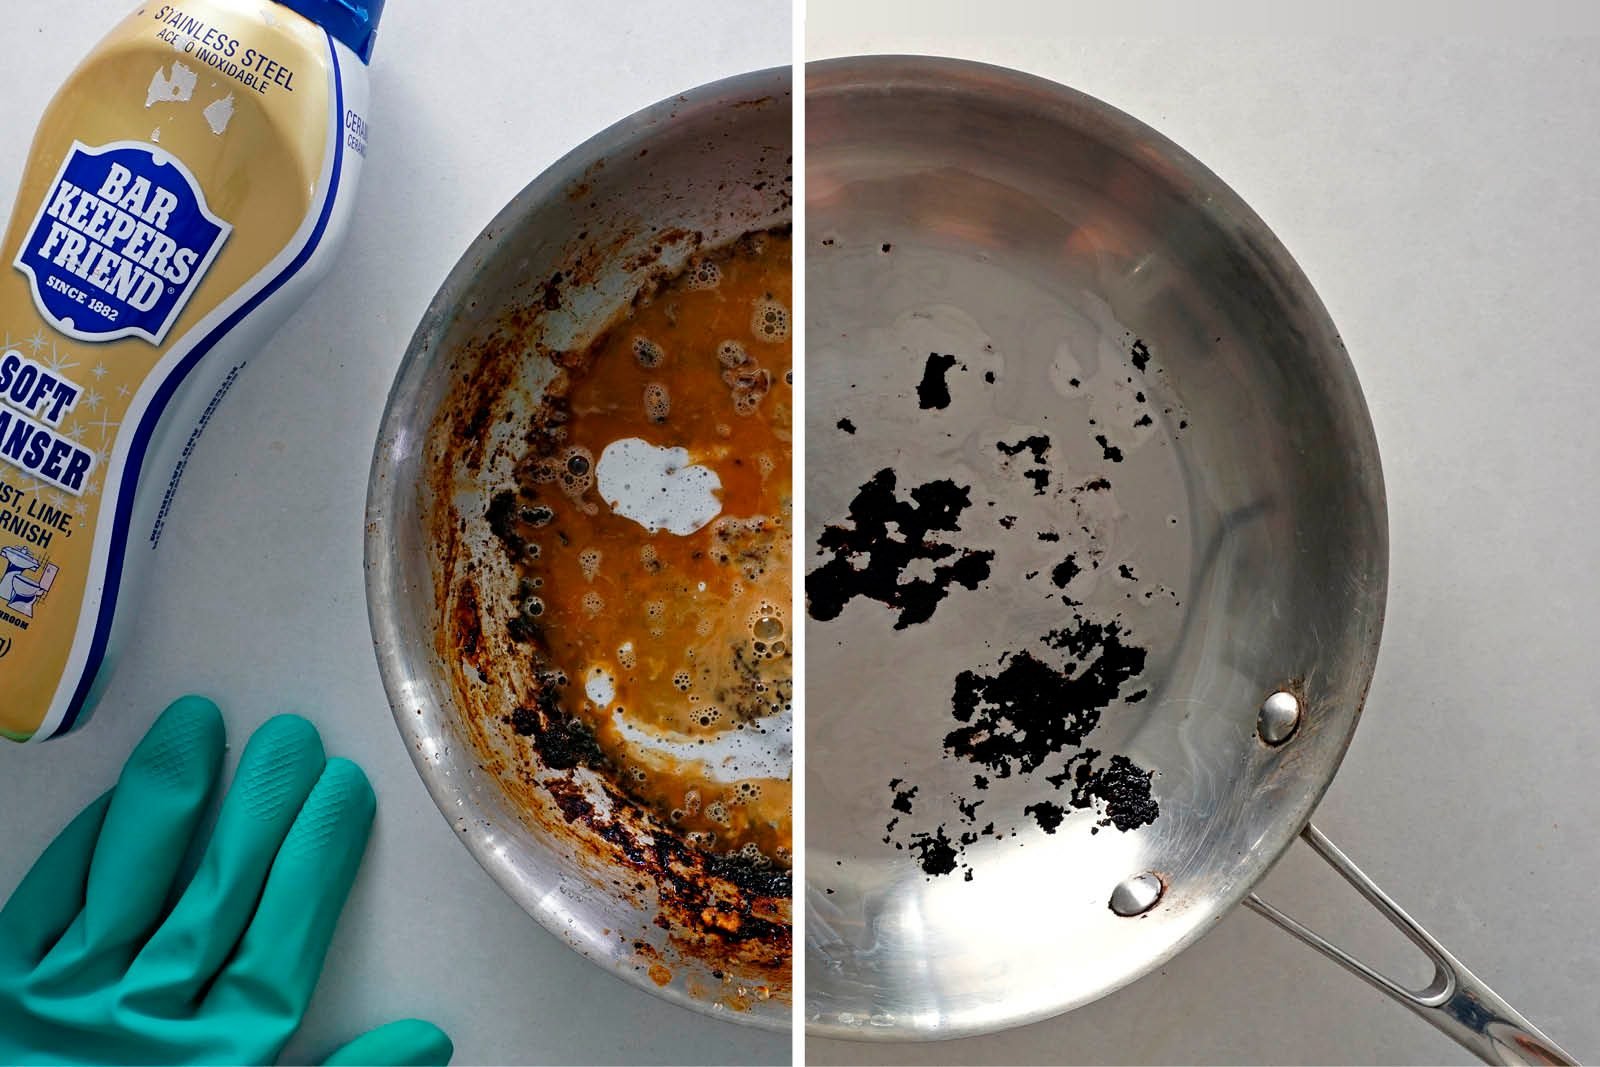 How to clean stainless steel pots perfectly